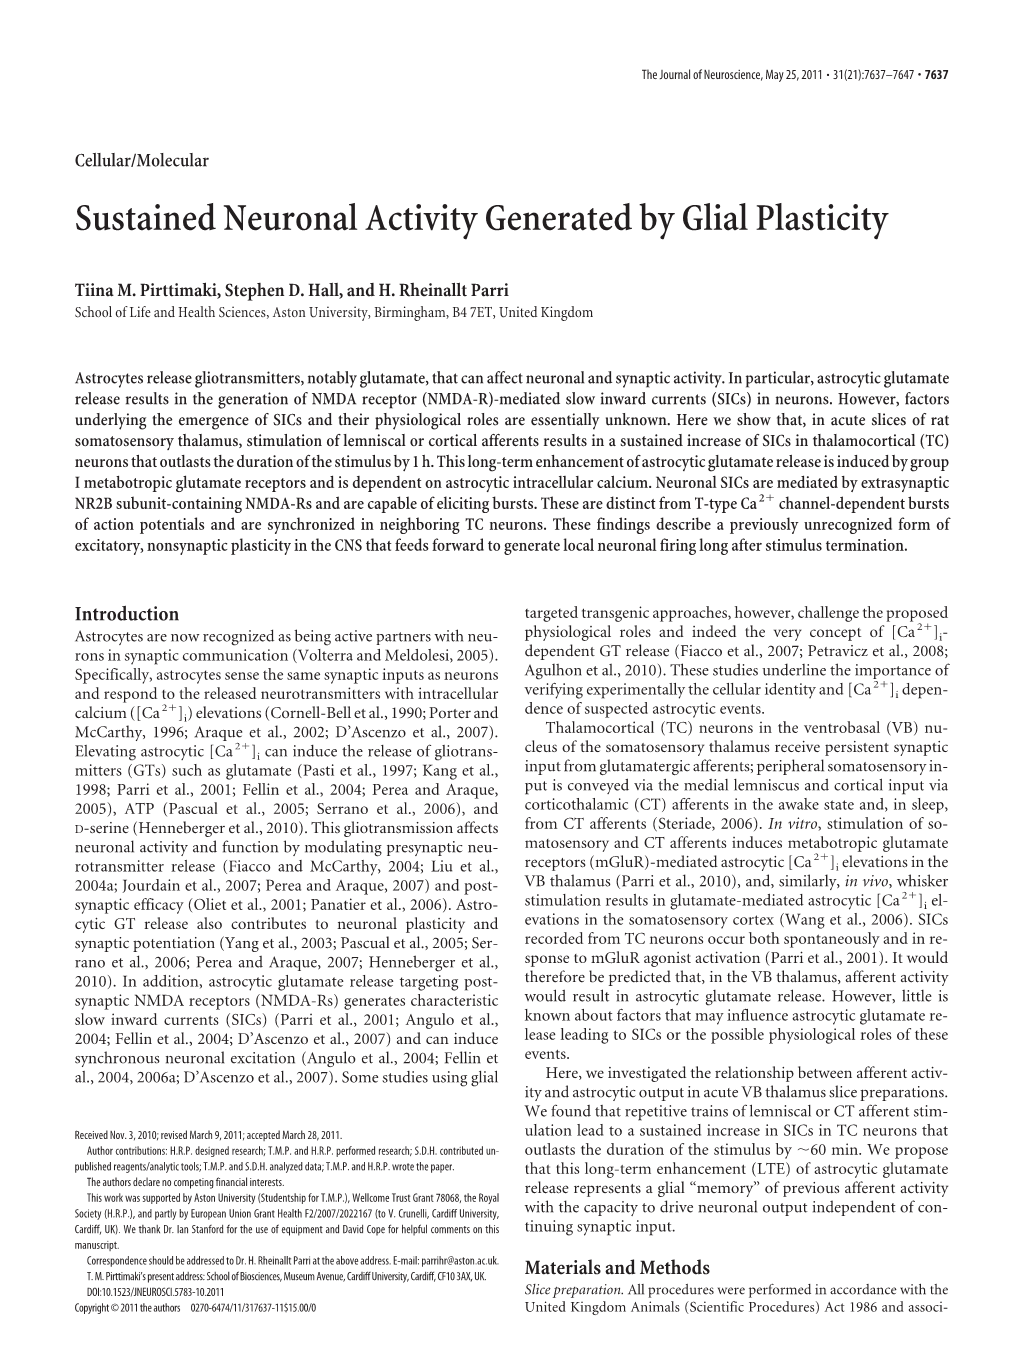 Sustained Neuronal Activity Generated by Glial Plasticity